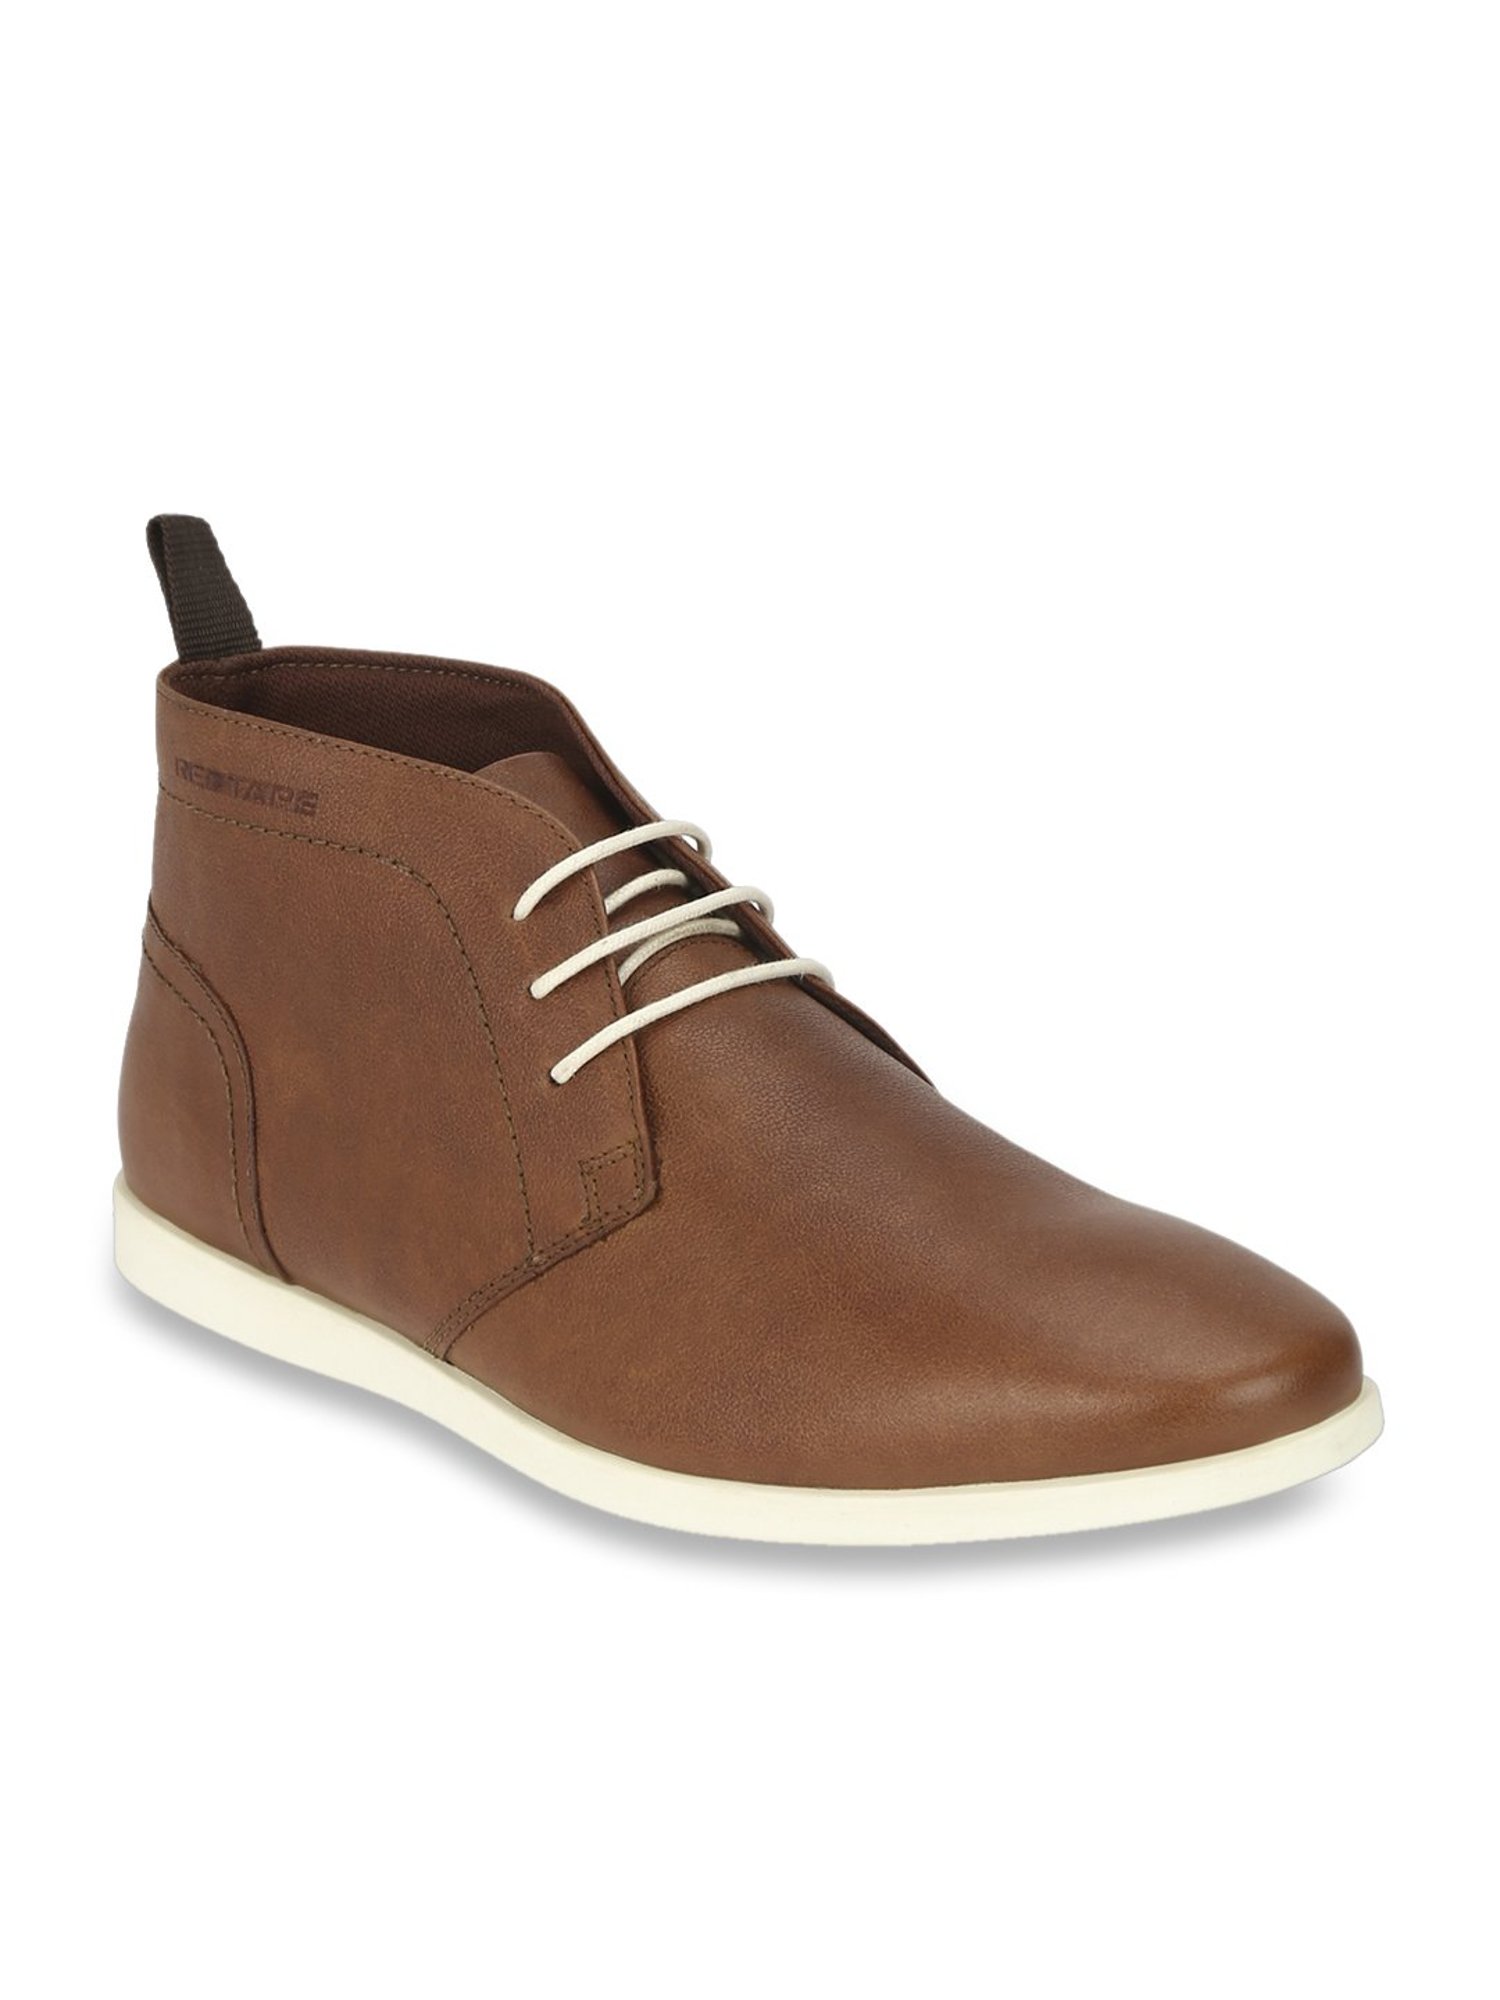 red tape chukka boots